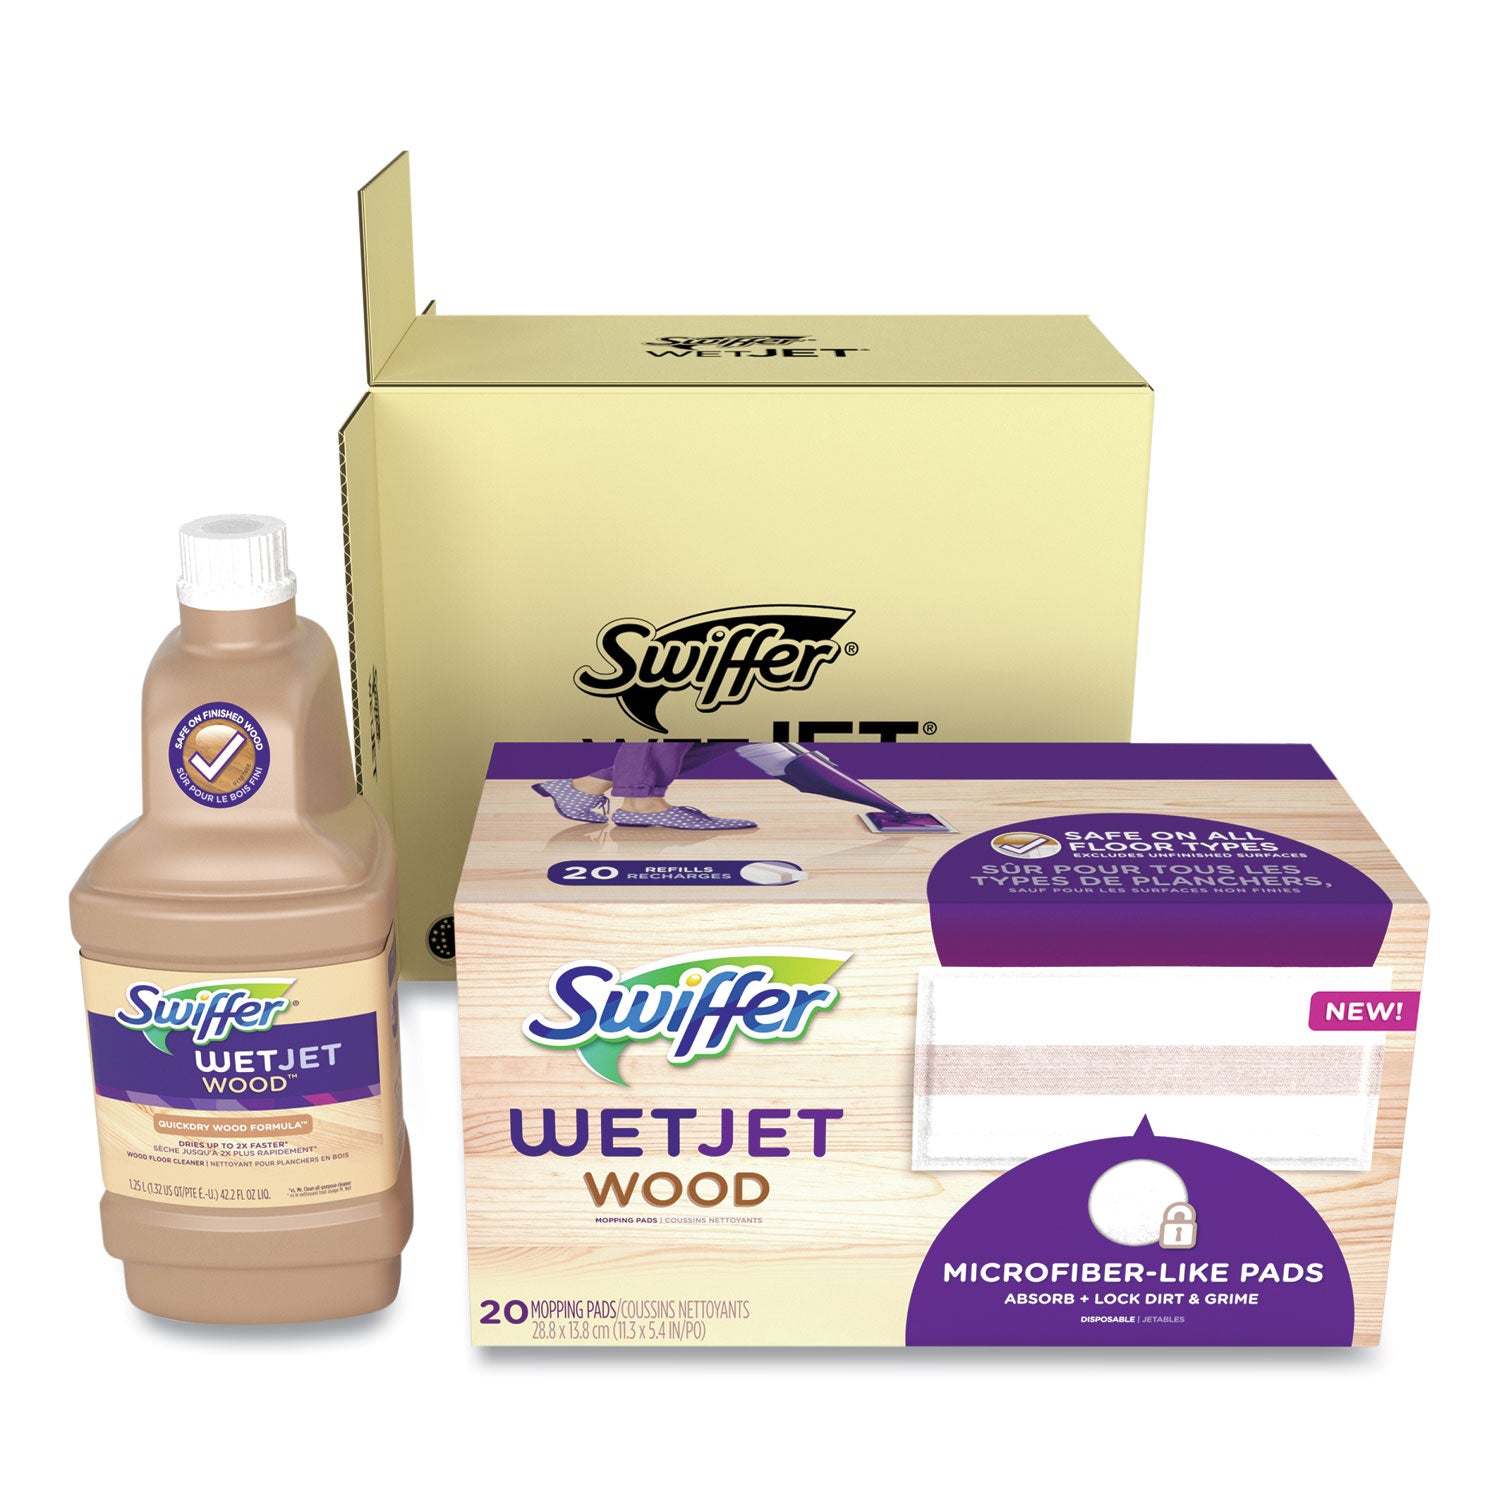 wetjet-system-wood-cleaning-solution-refill-with-mopping-pads-unscented-125-l-bottle_pgc77134 - 2